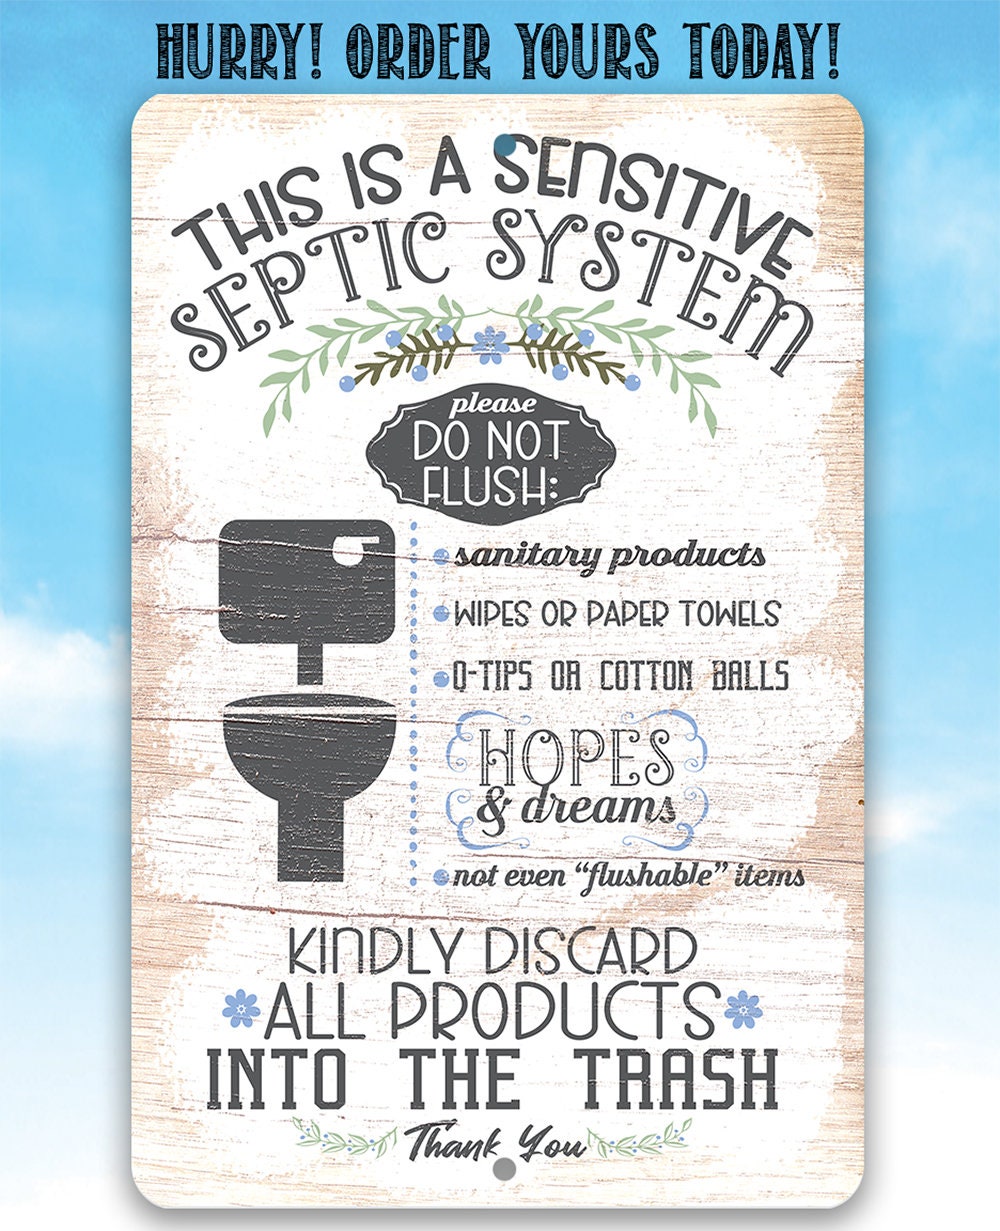 This Is A Sensitive Septic System - Metal Sign Metal Sign Lone Star Art 